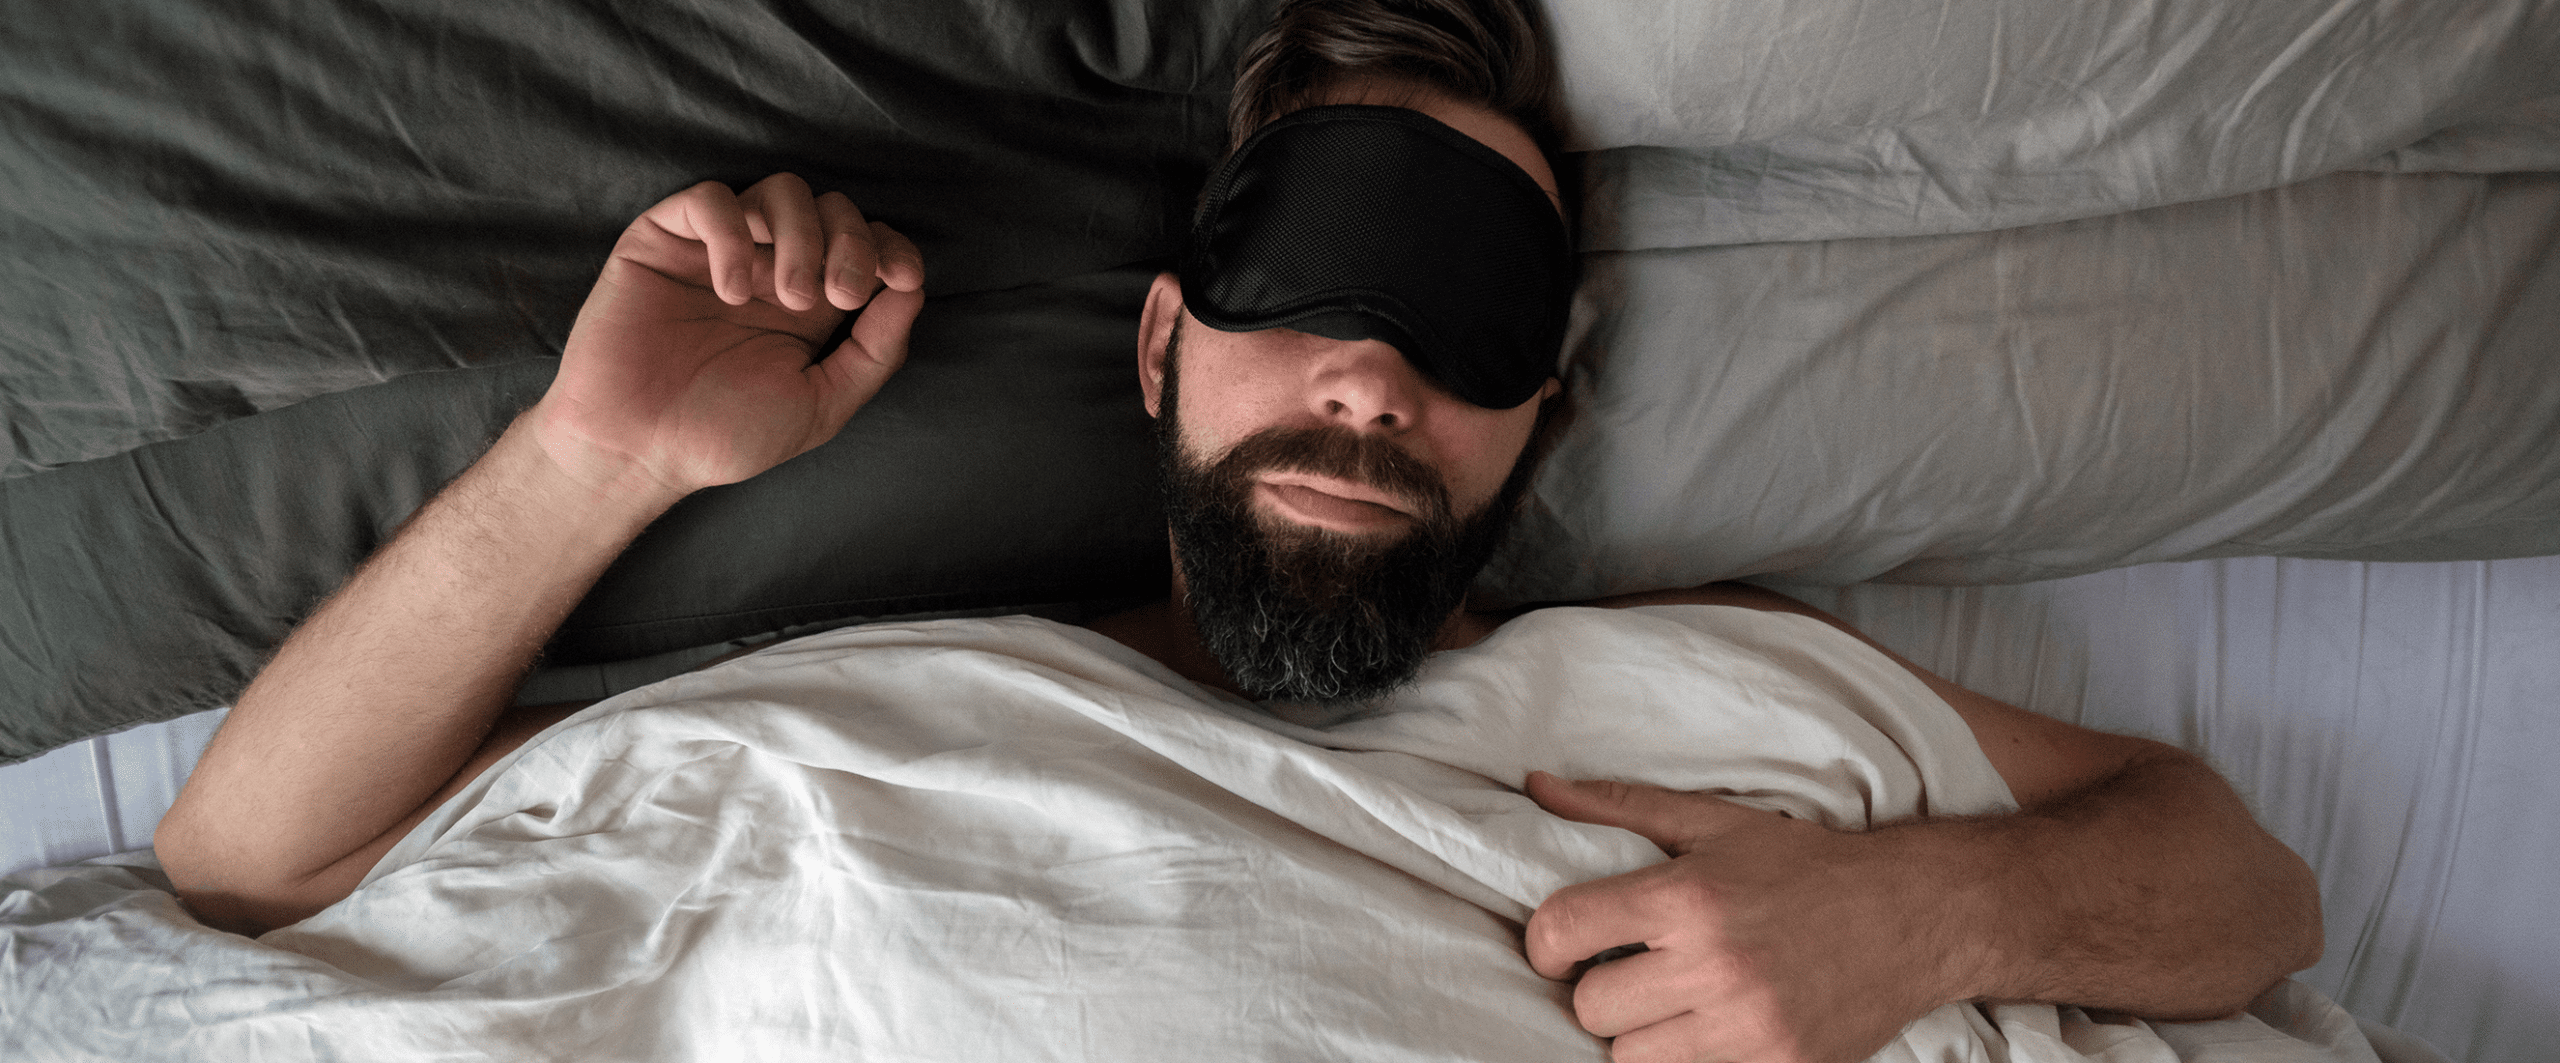 a man sleeps on his back in bed wearing an eye mask